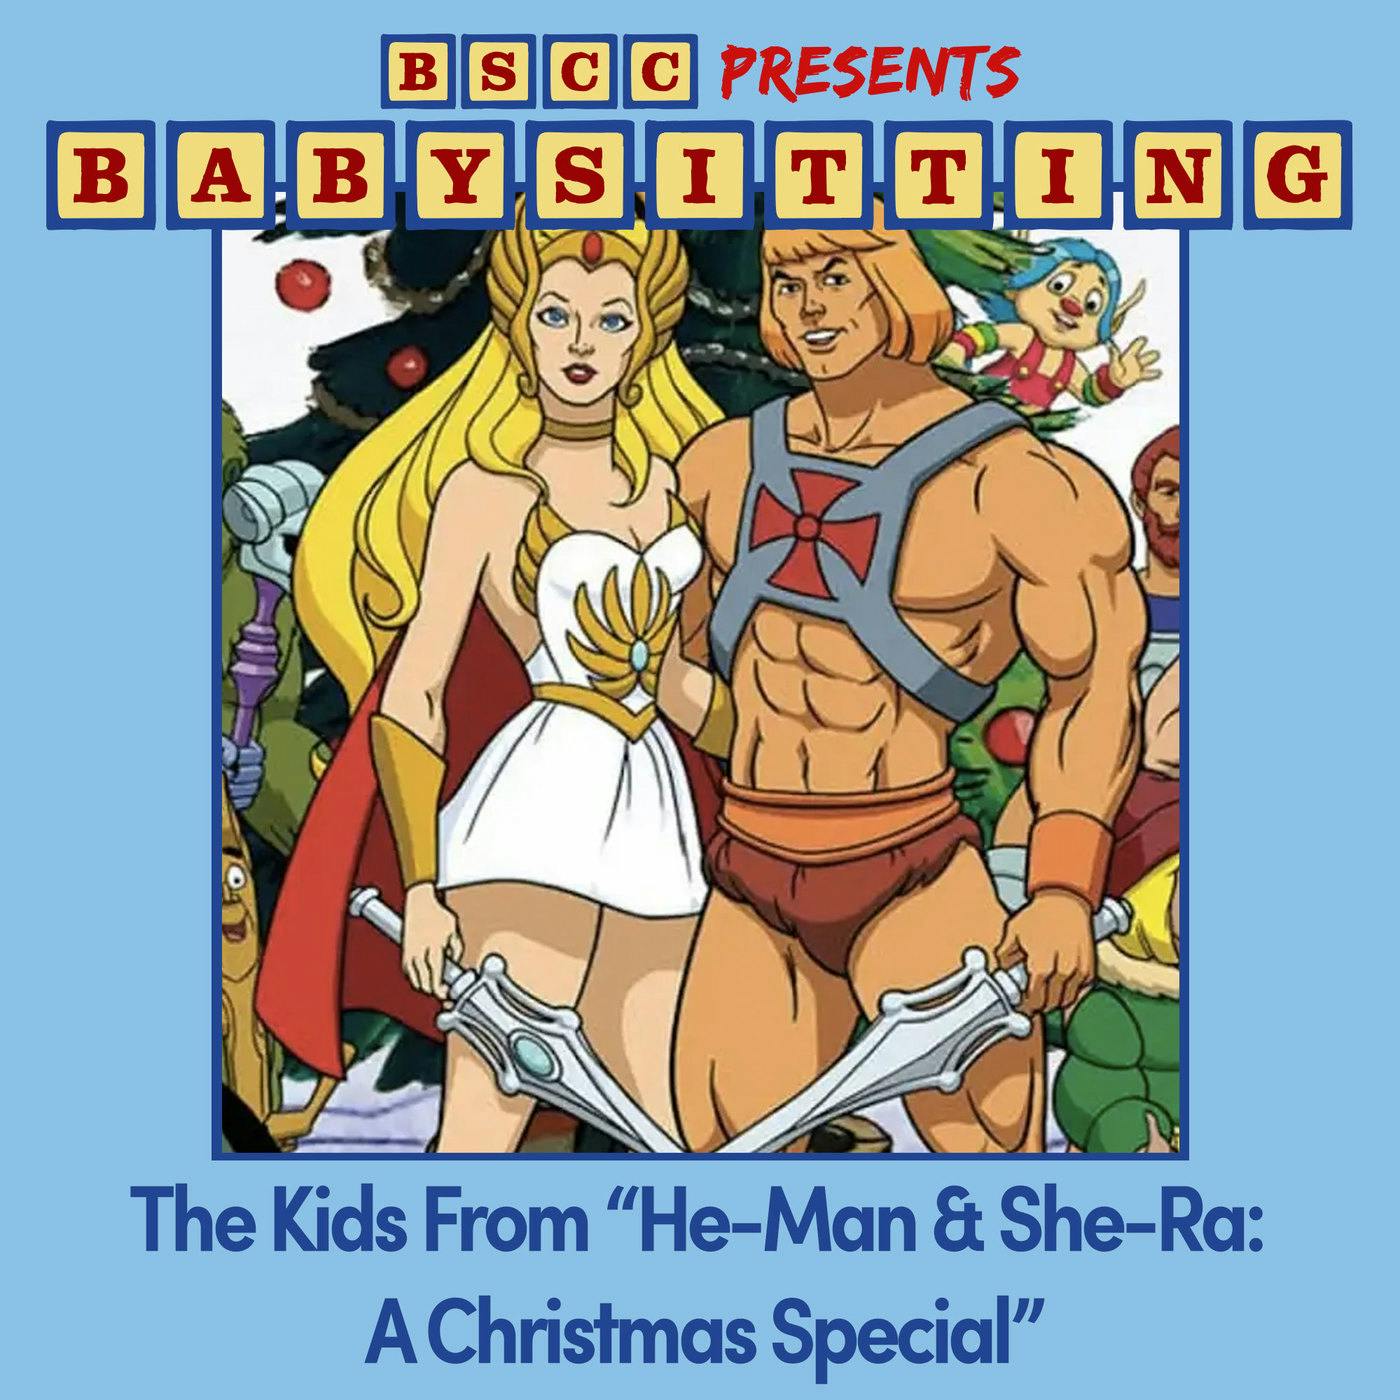 BSCC Presents: Babysitting the Kids in 